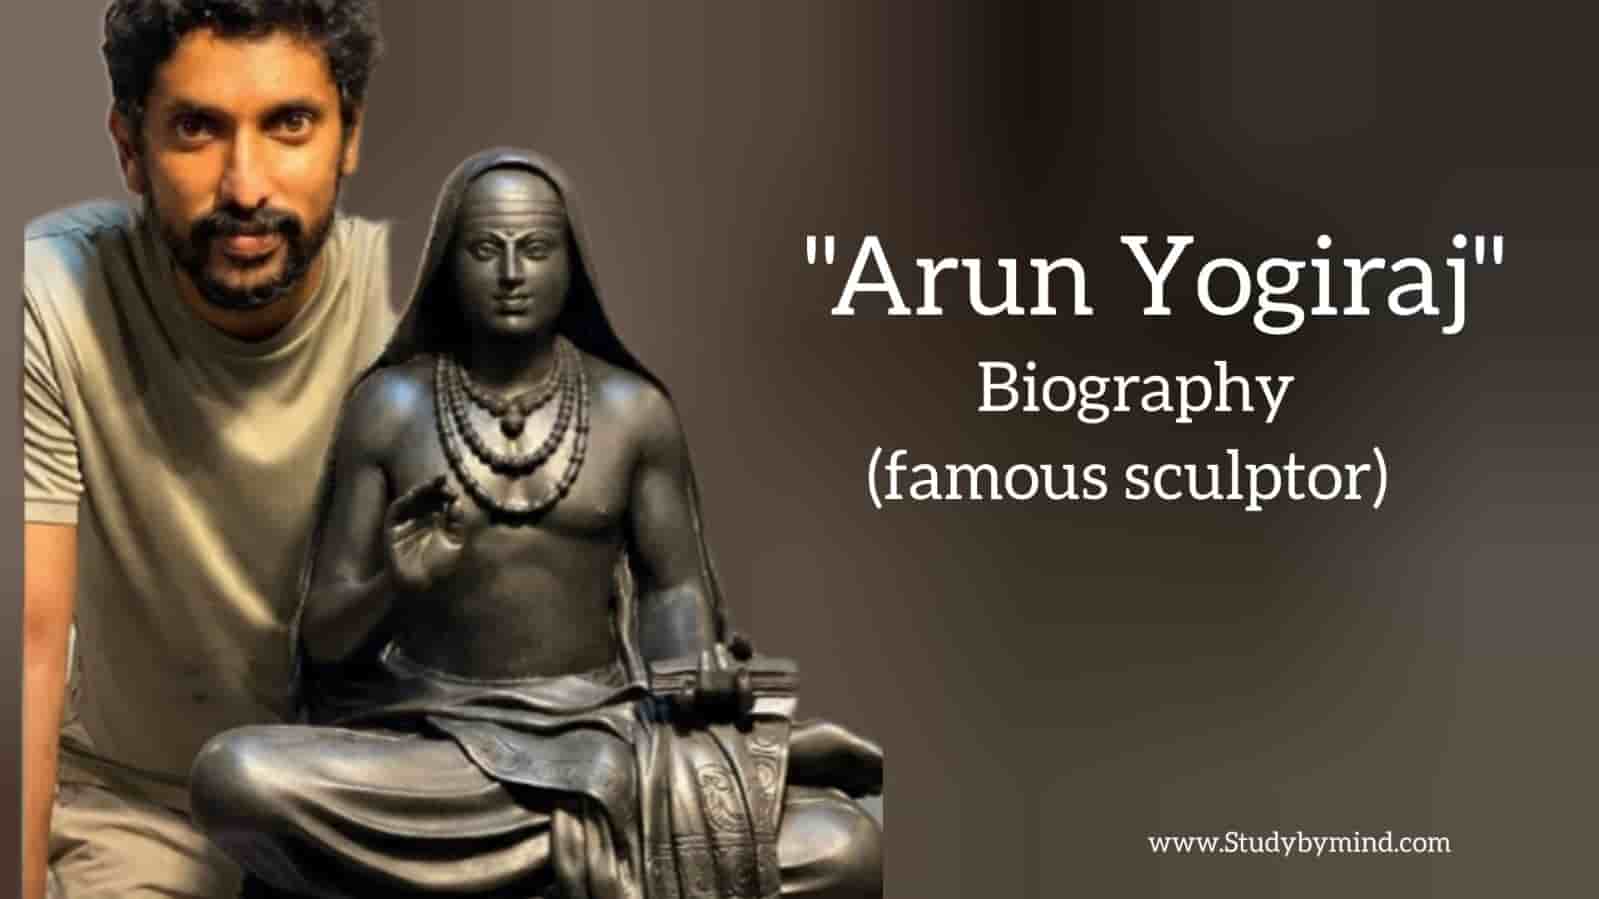 You are currently viewing Arun yogiraj biography in english (sculptor)